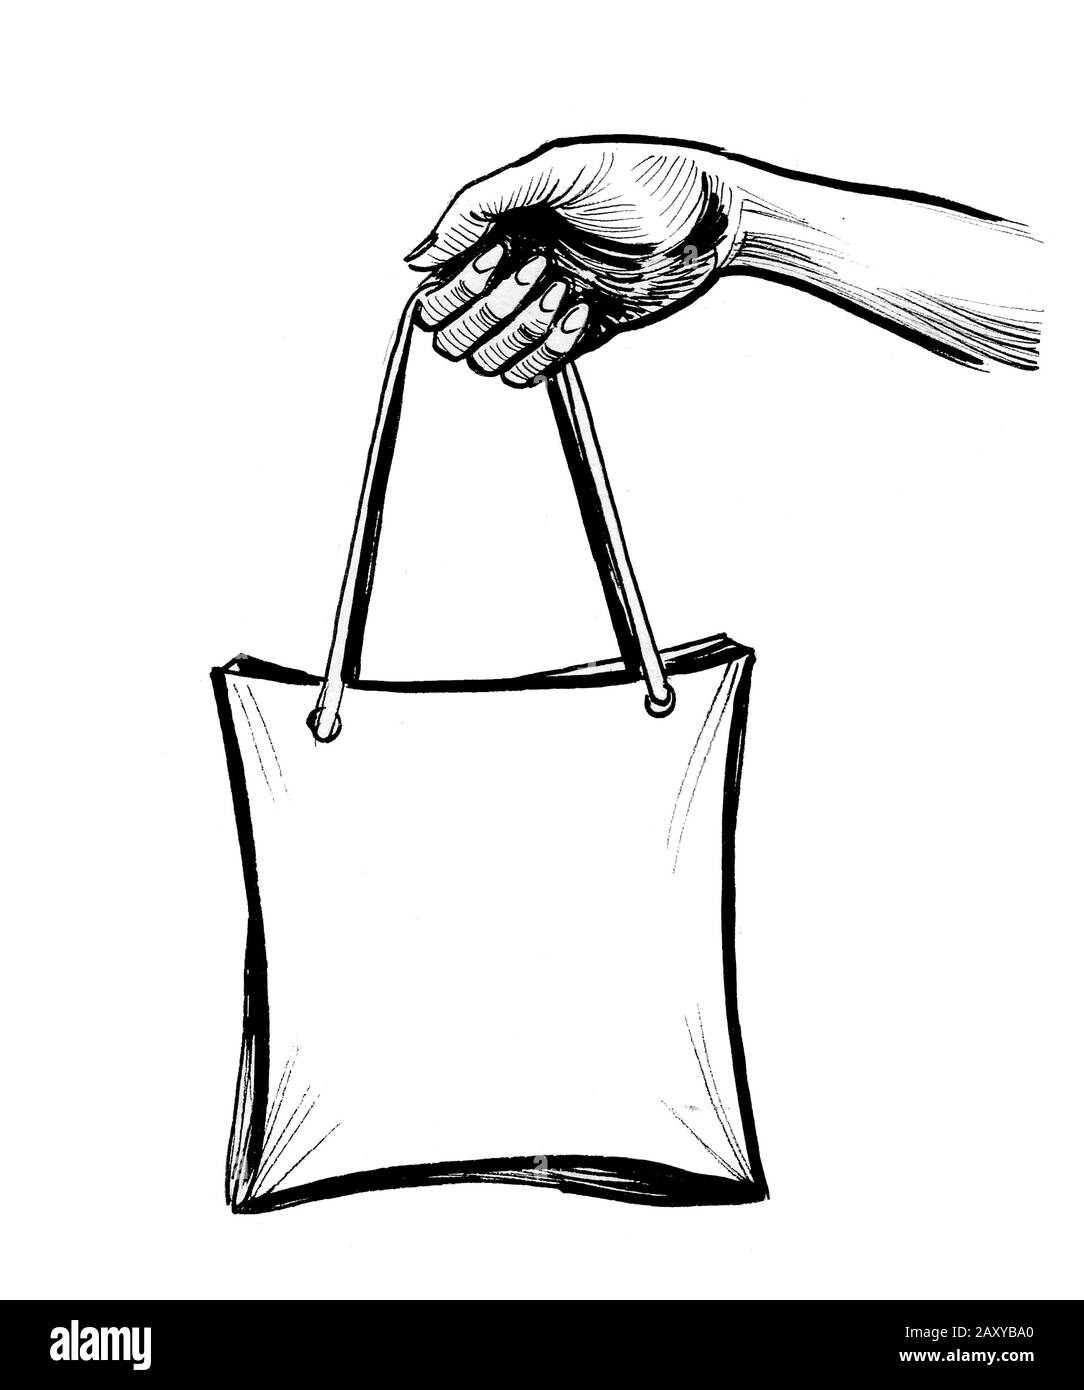 Blank Canvas Tote Bag Flat Design Isolated On White Background Stock  Illustration - Download Image Now - iStock